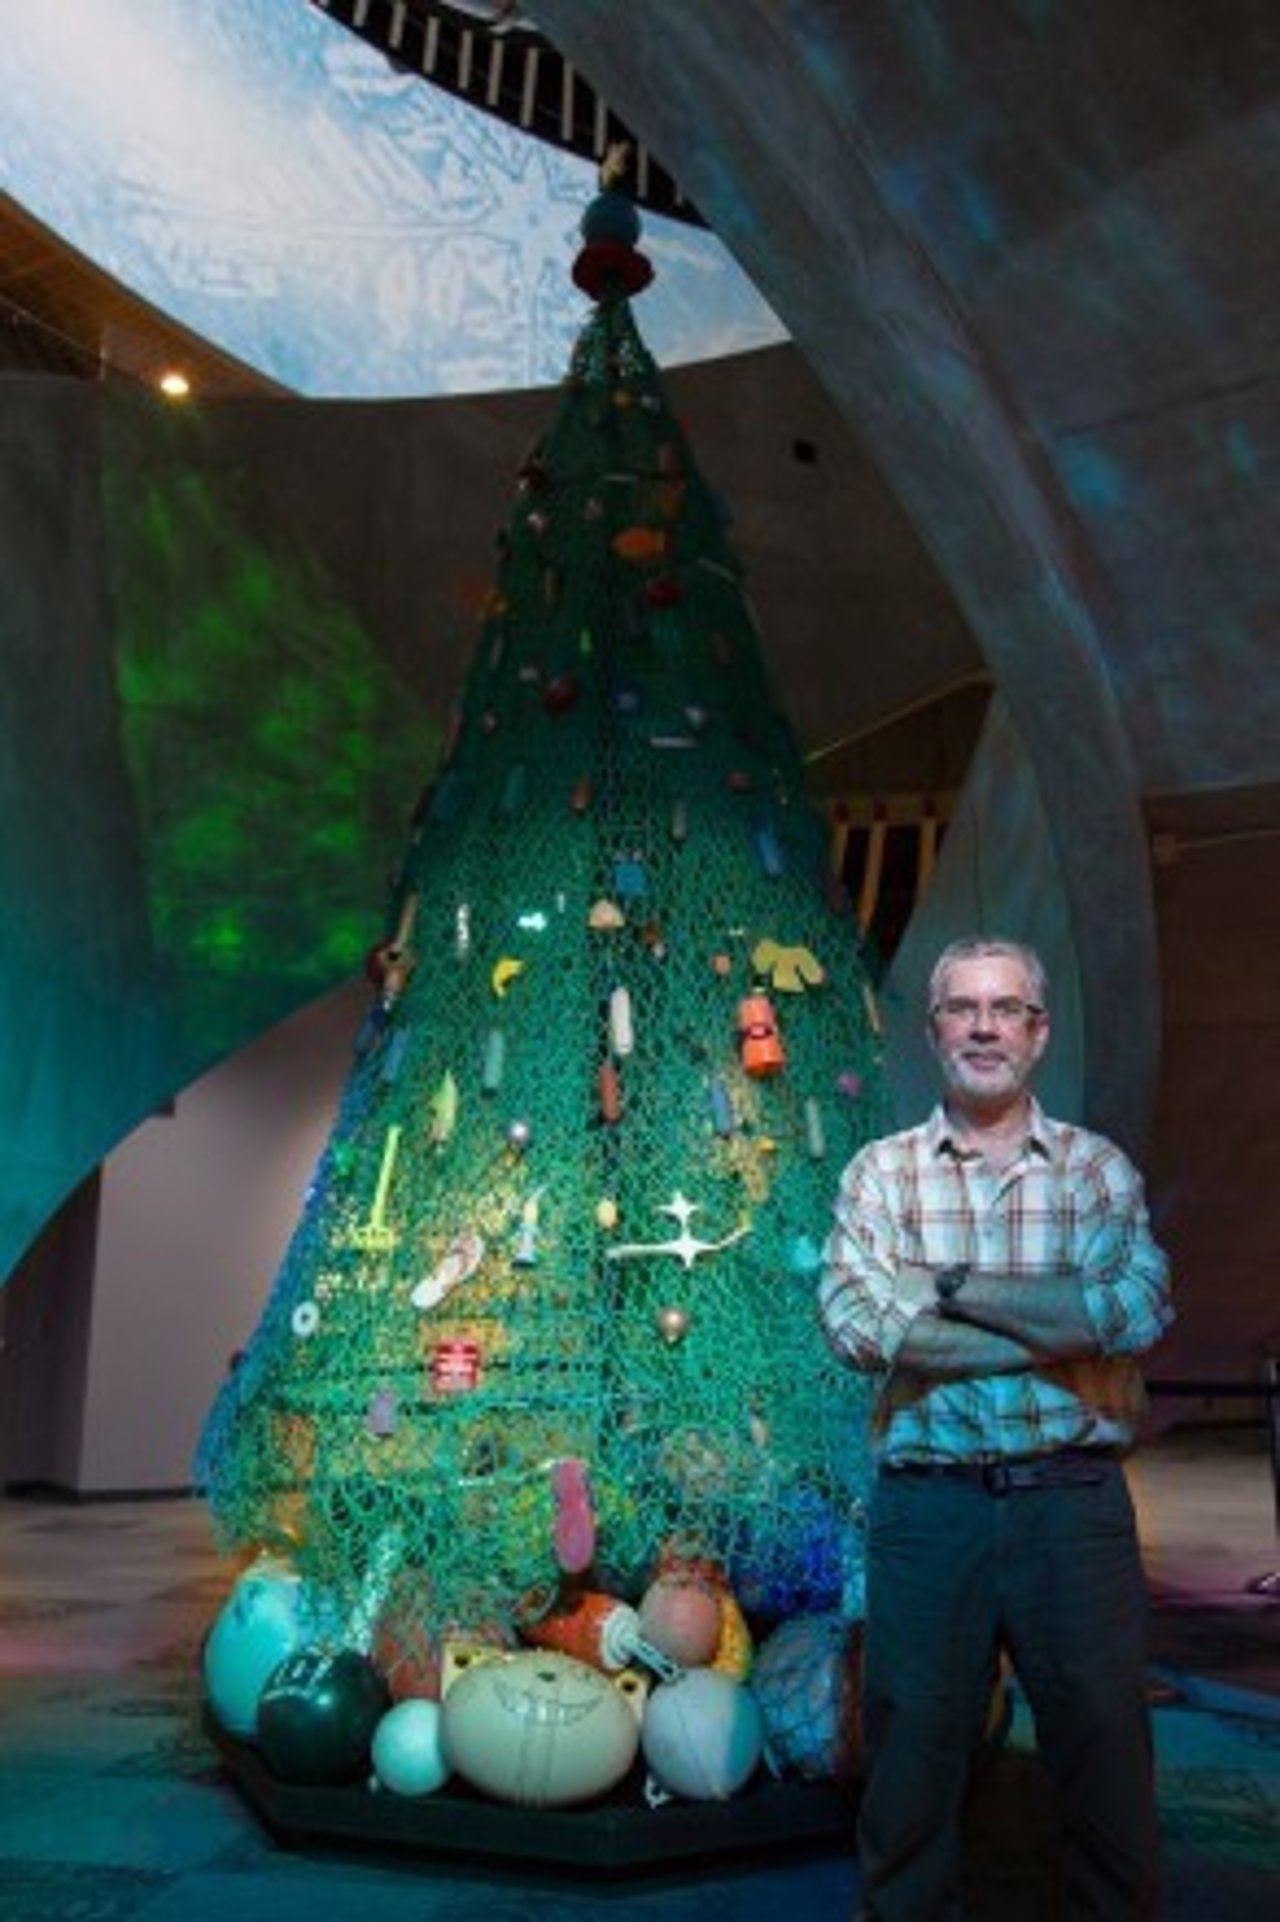 Christmas tree constructed from marine debris found along the West Canadian shoreline